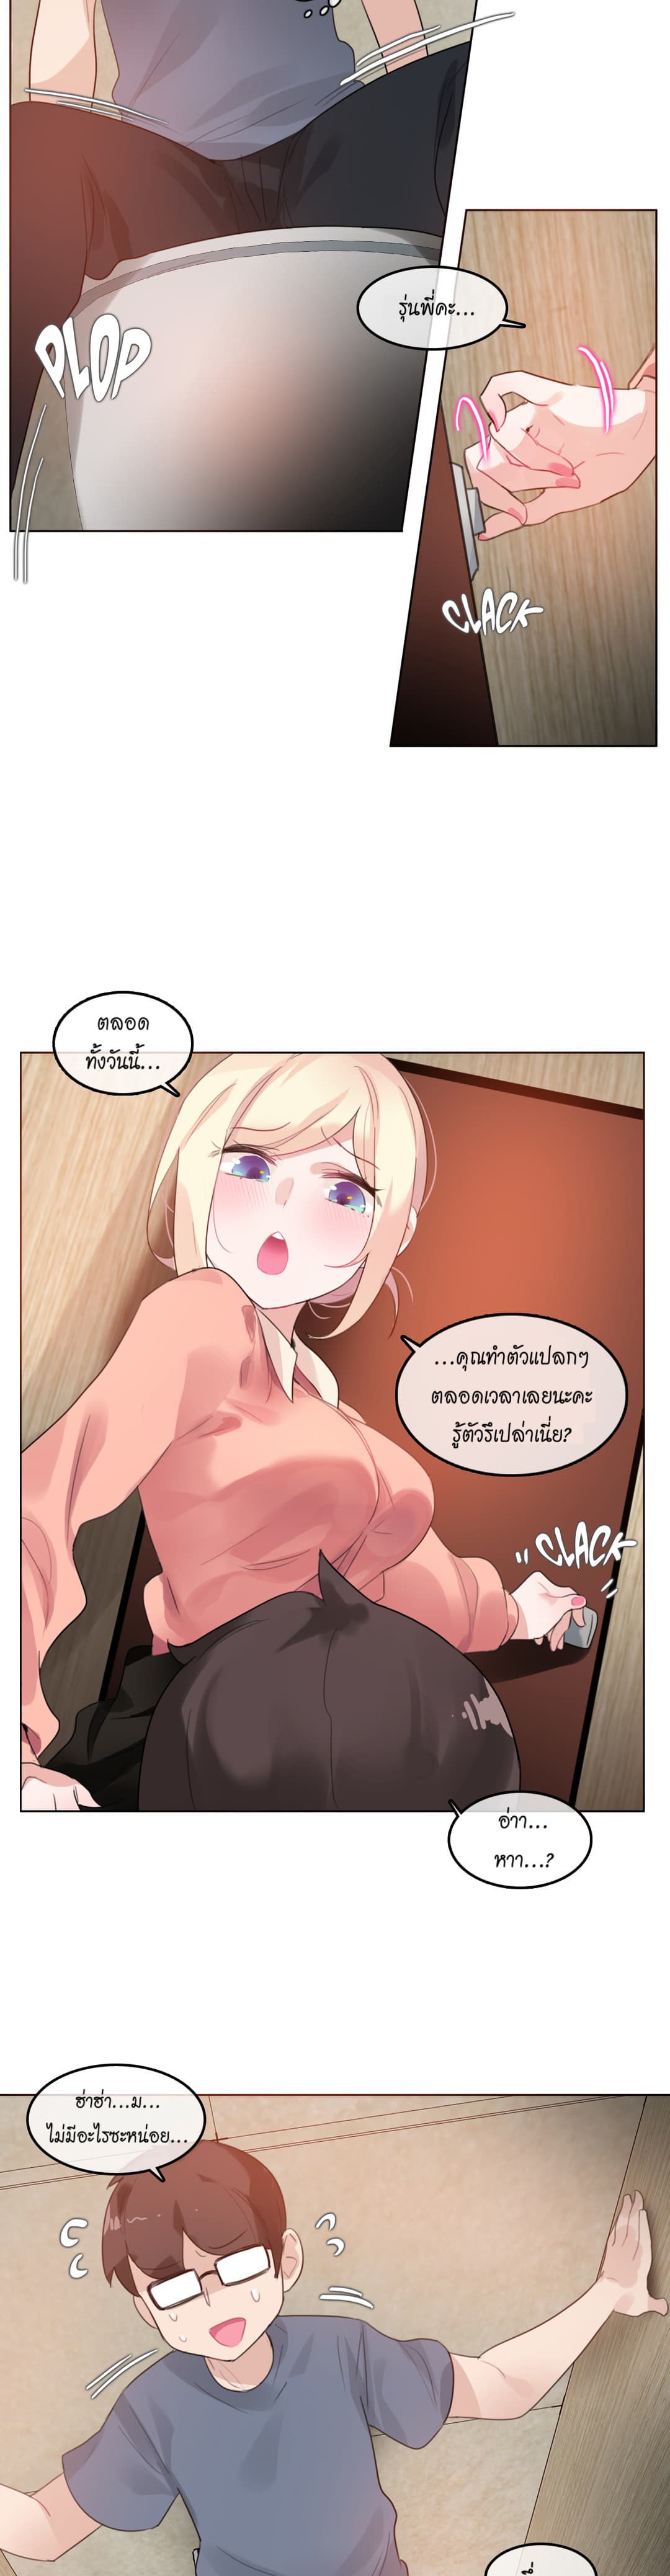 A Pervert’s Daily Life 41 (11)